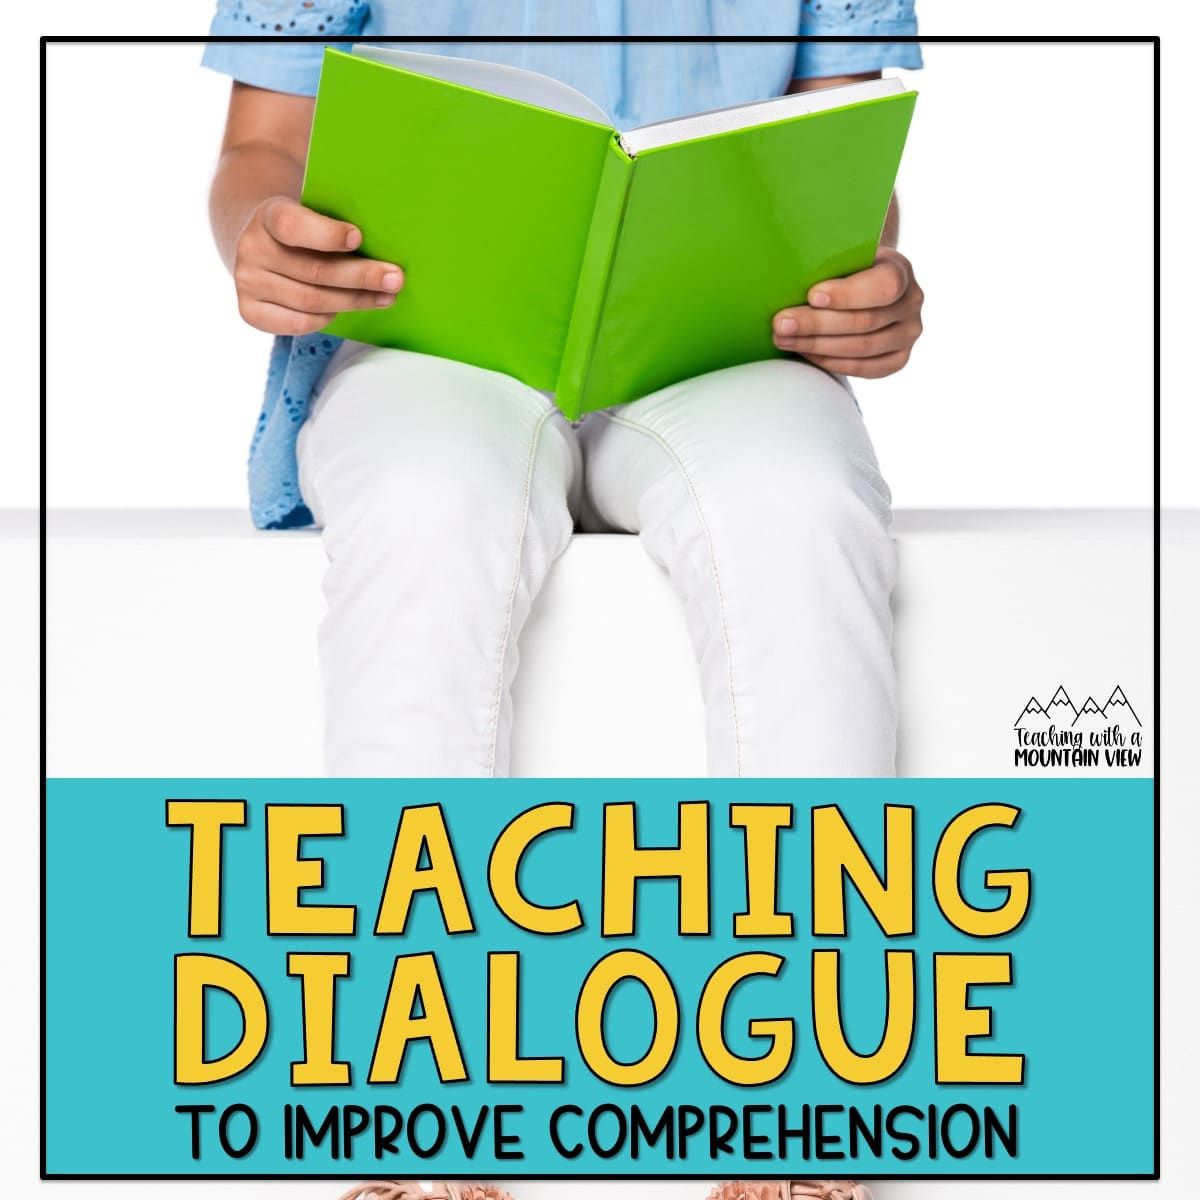 Teach students to use dialogue to make inferences about characters and improve their comprehension skills in upper elementary.